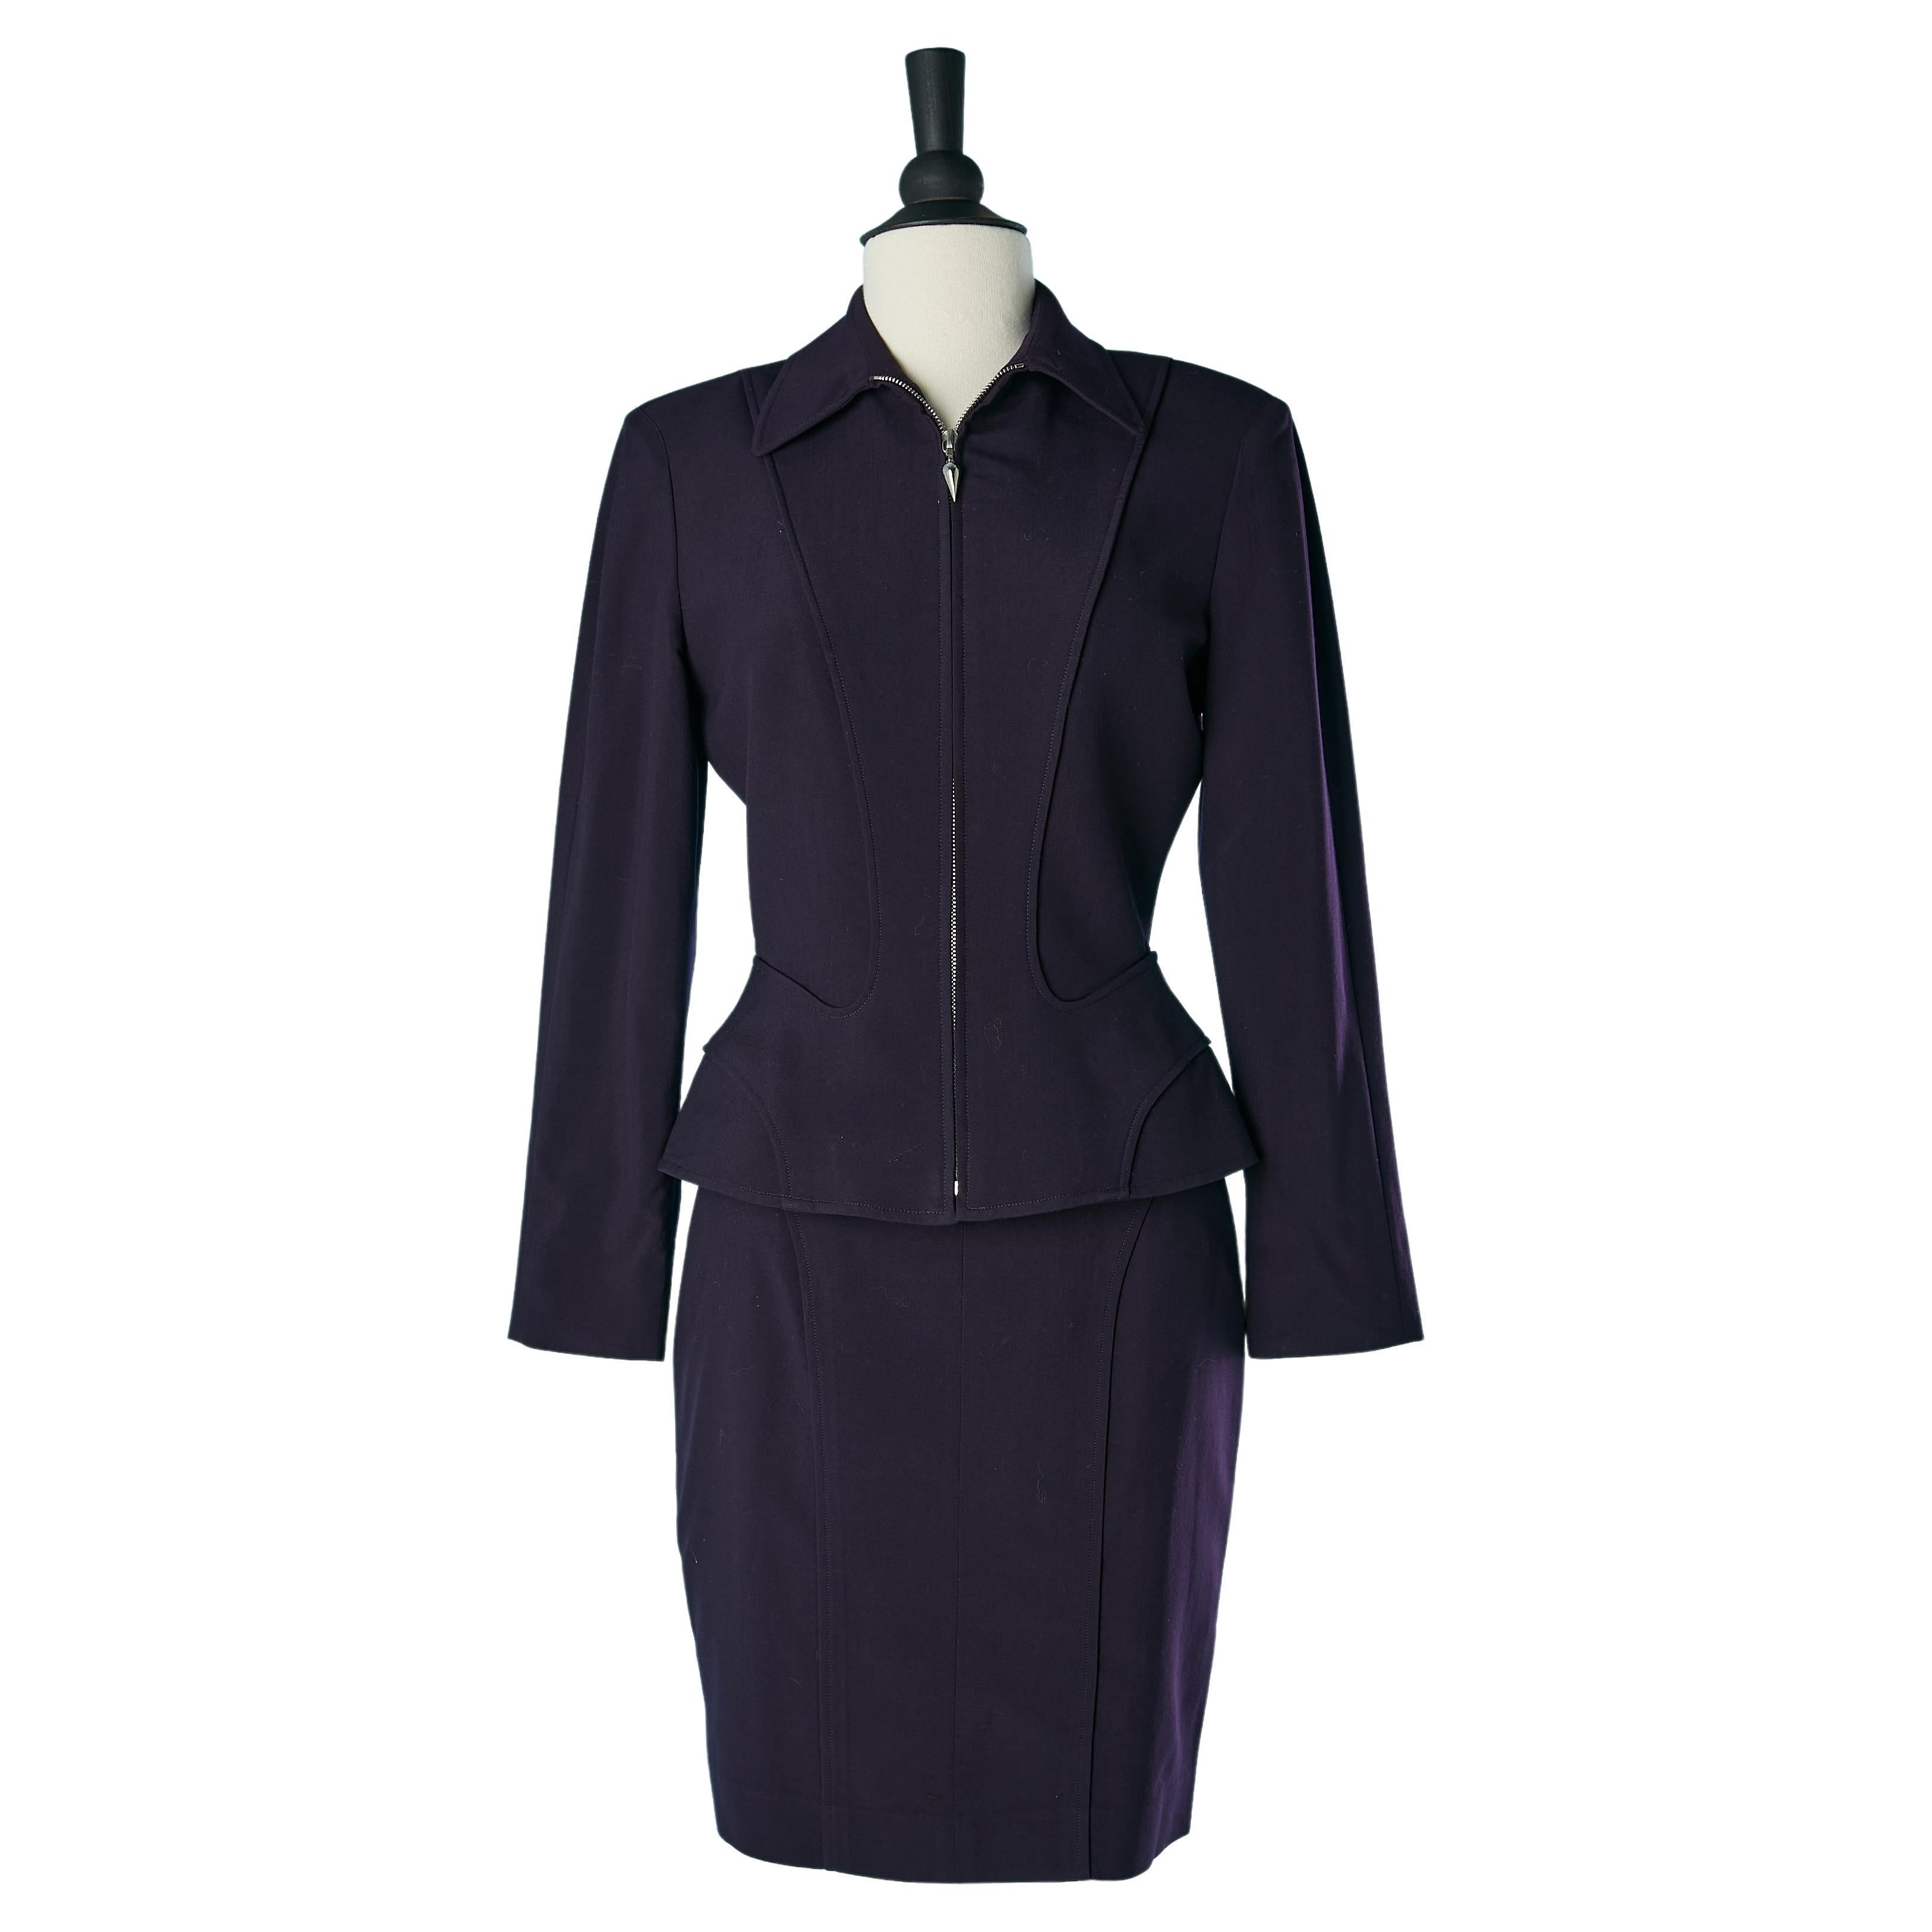 Purple skirt suit with zip closure middle front MUGLER  Circa 2000